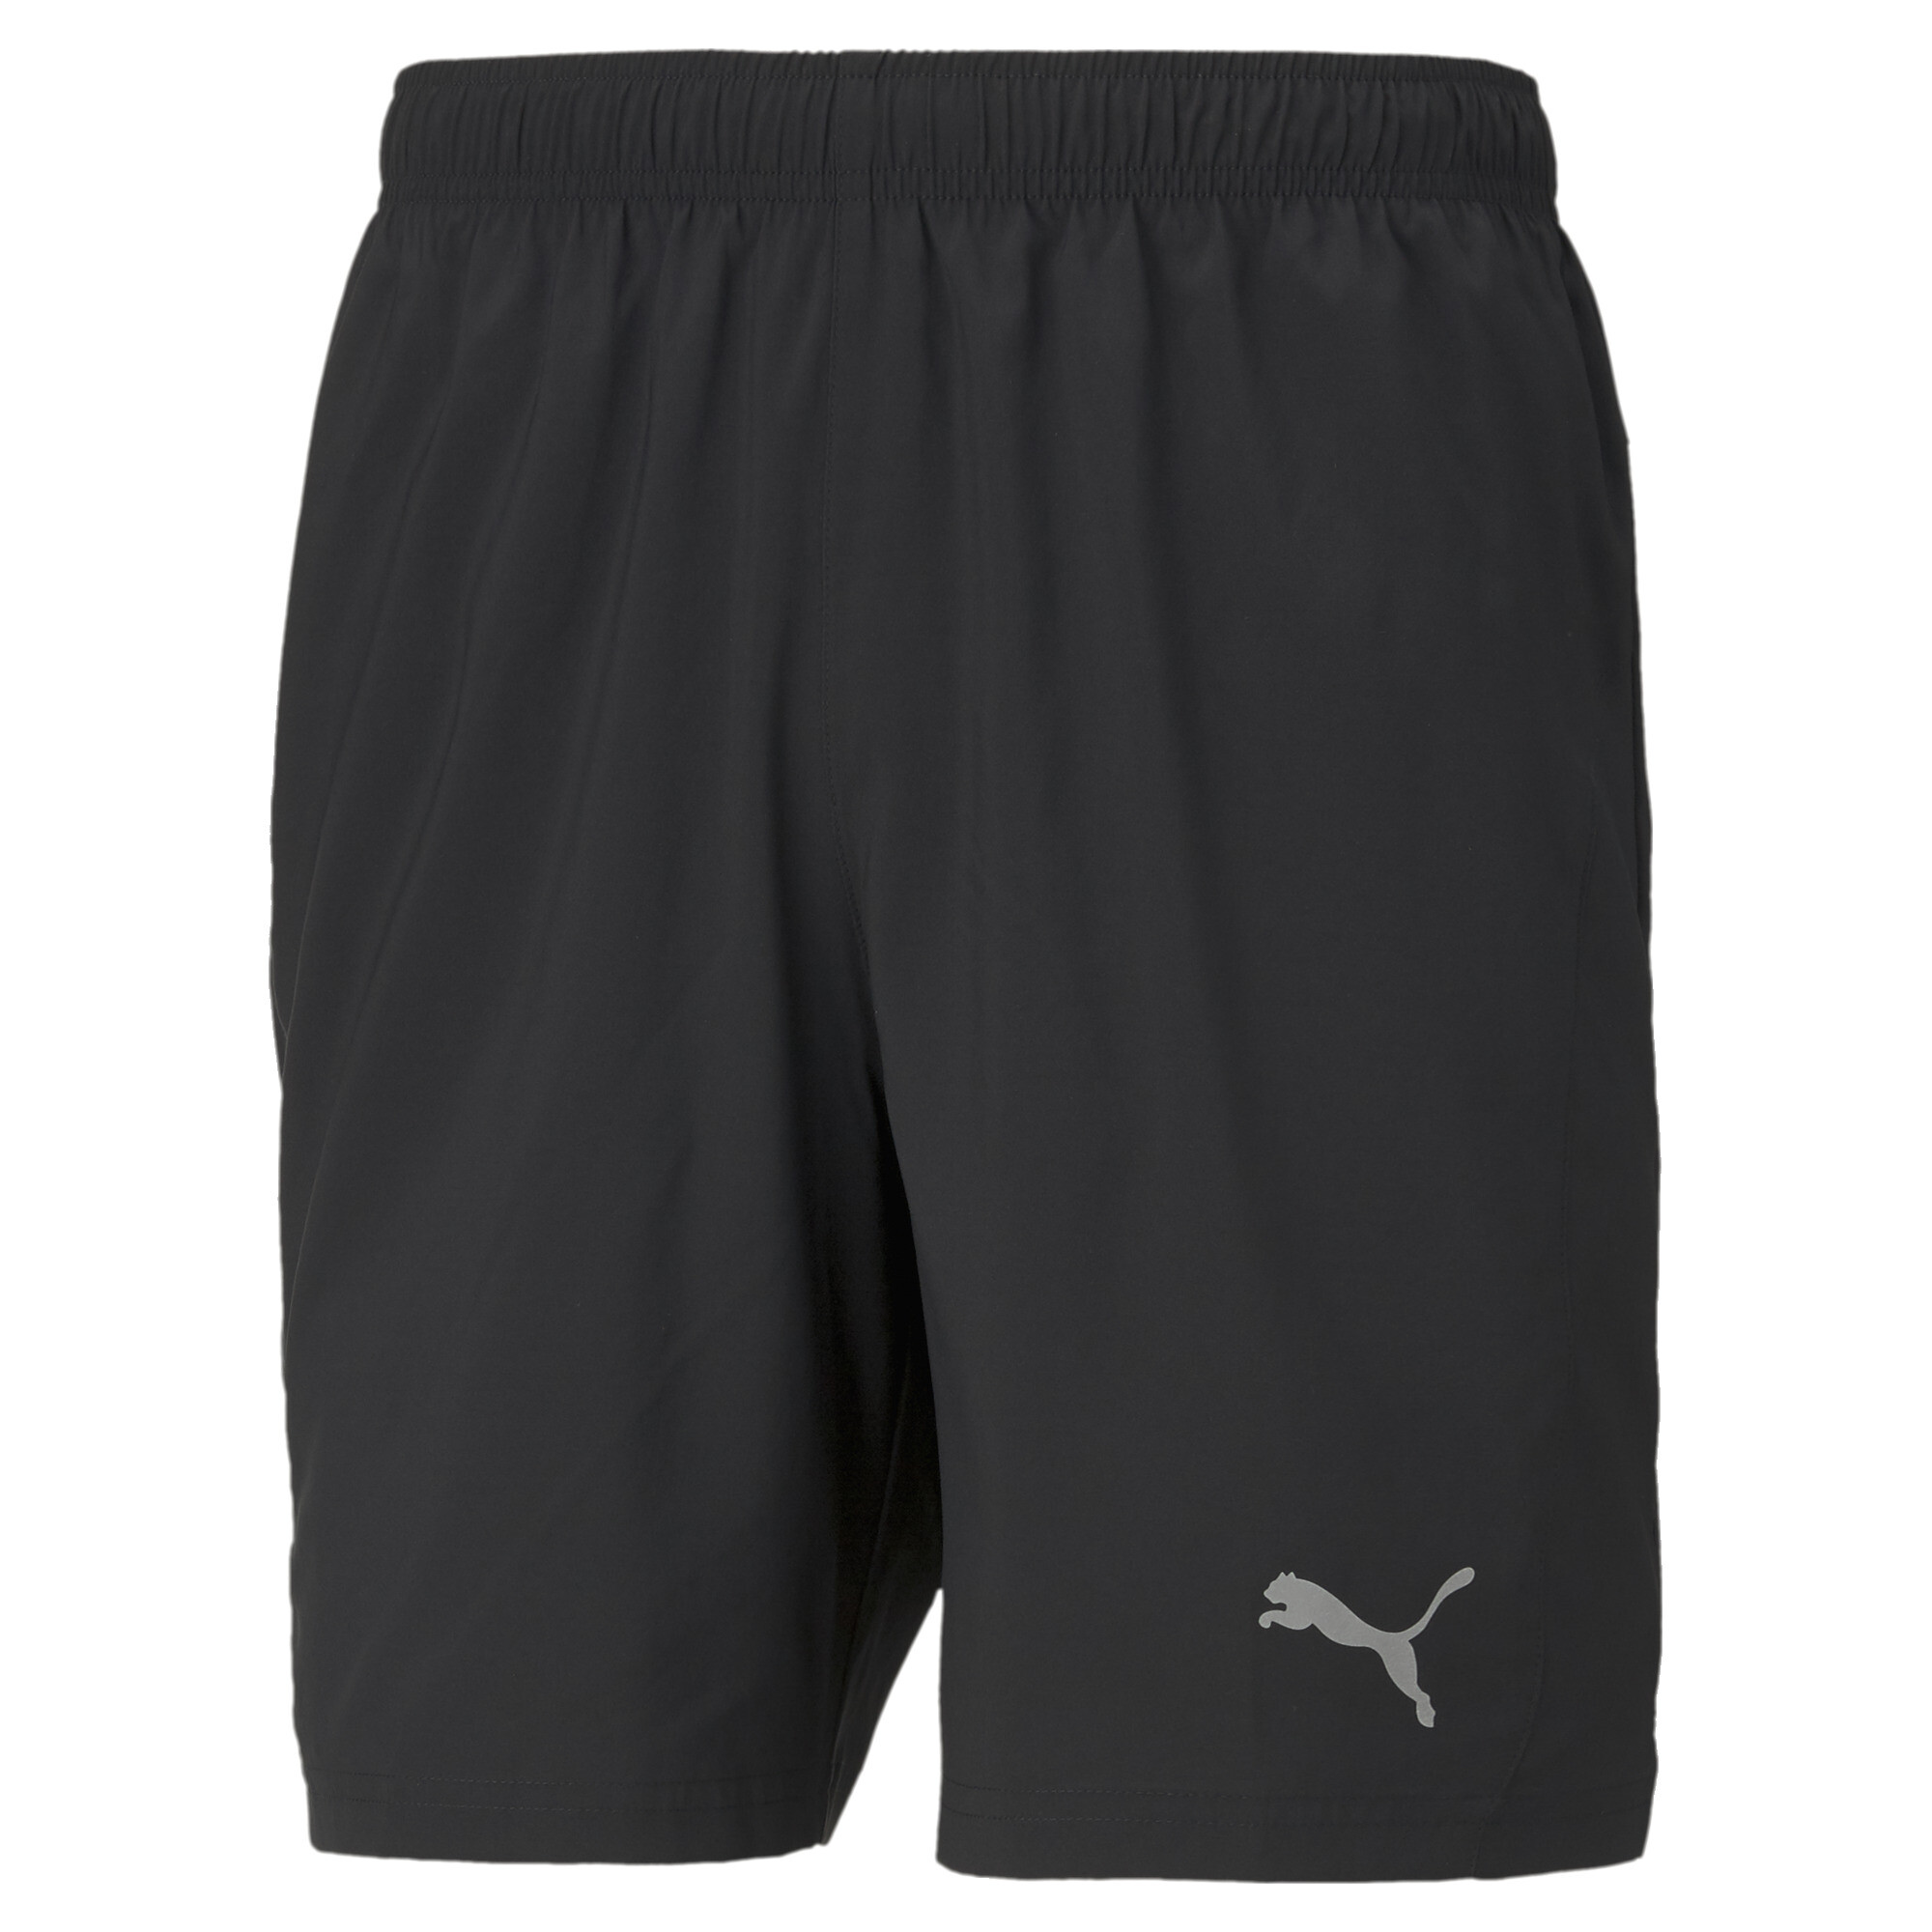 Men's PUMA Favourite Woven 7 Session Running Shorts In Black, Size XL